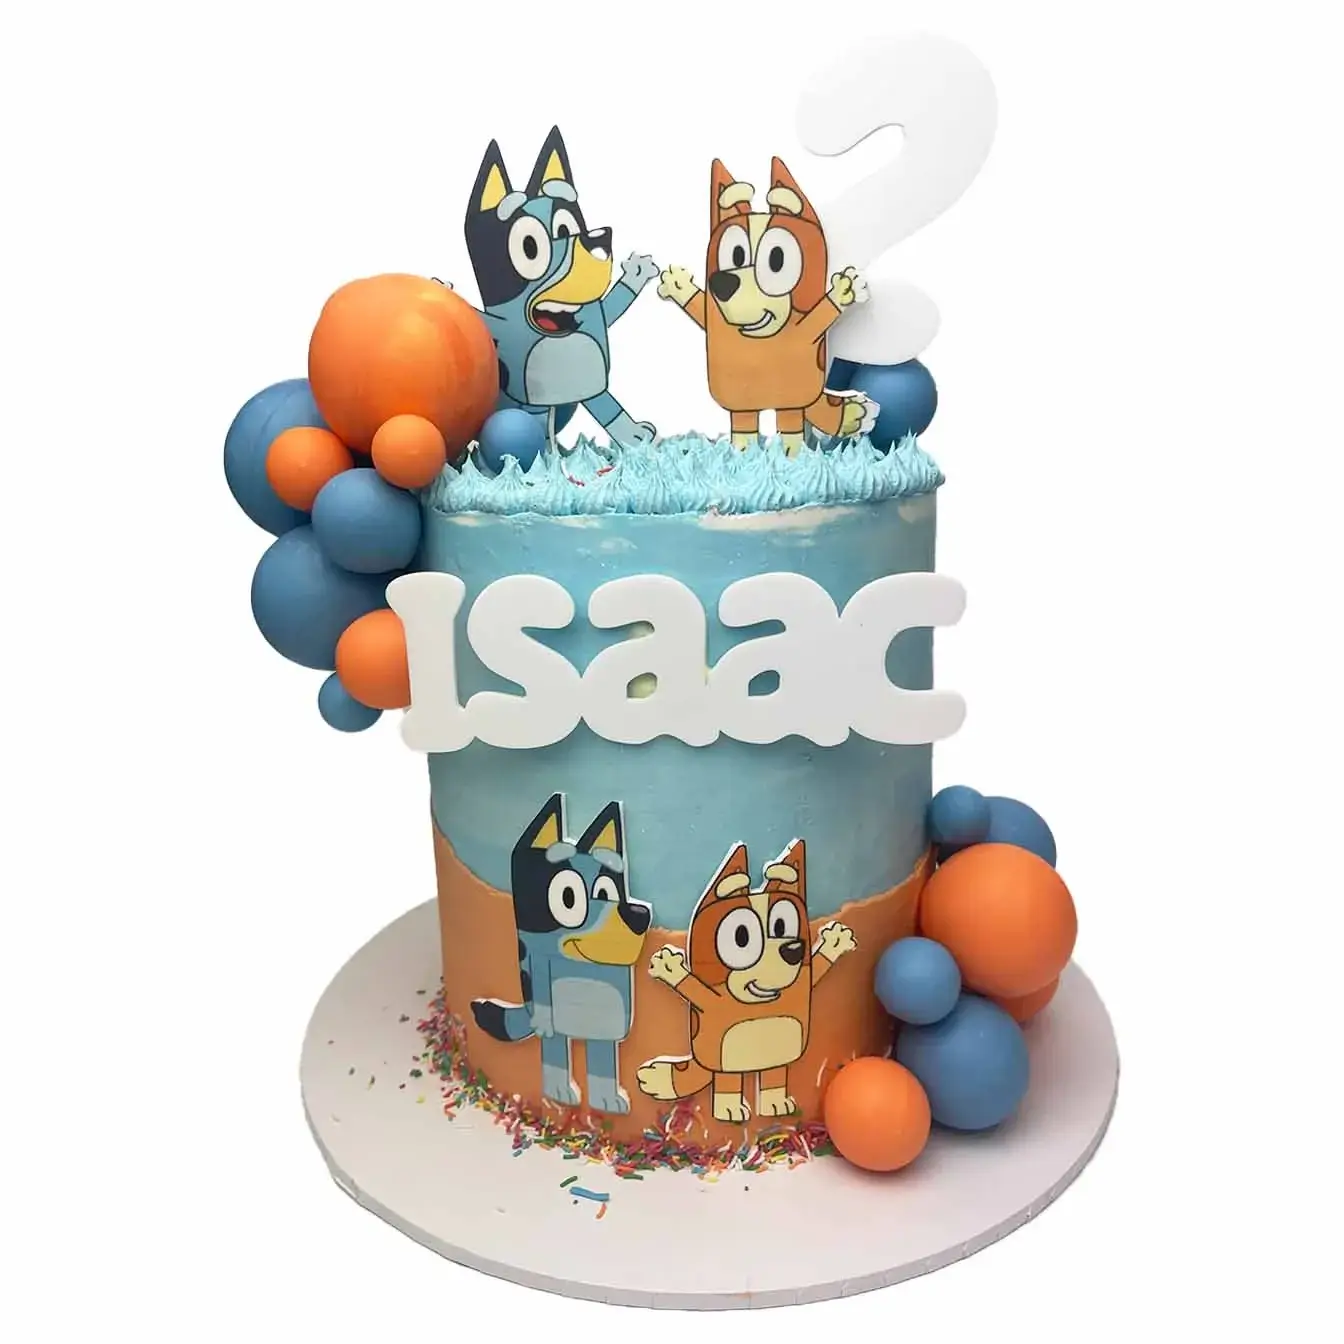 Bluey and Bingo Playtime Cake - A cake with blue and orange icing, edible images of Bluey and Bingo, a custom name topper, dipped chocolate spheres, blue piping, and sprinkles, a vibrant and playful centerpiece for fans of these animated characters.